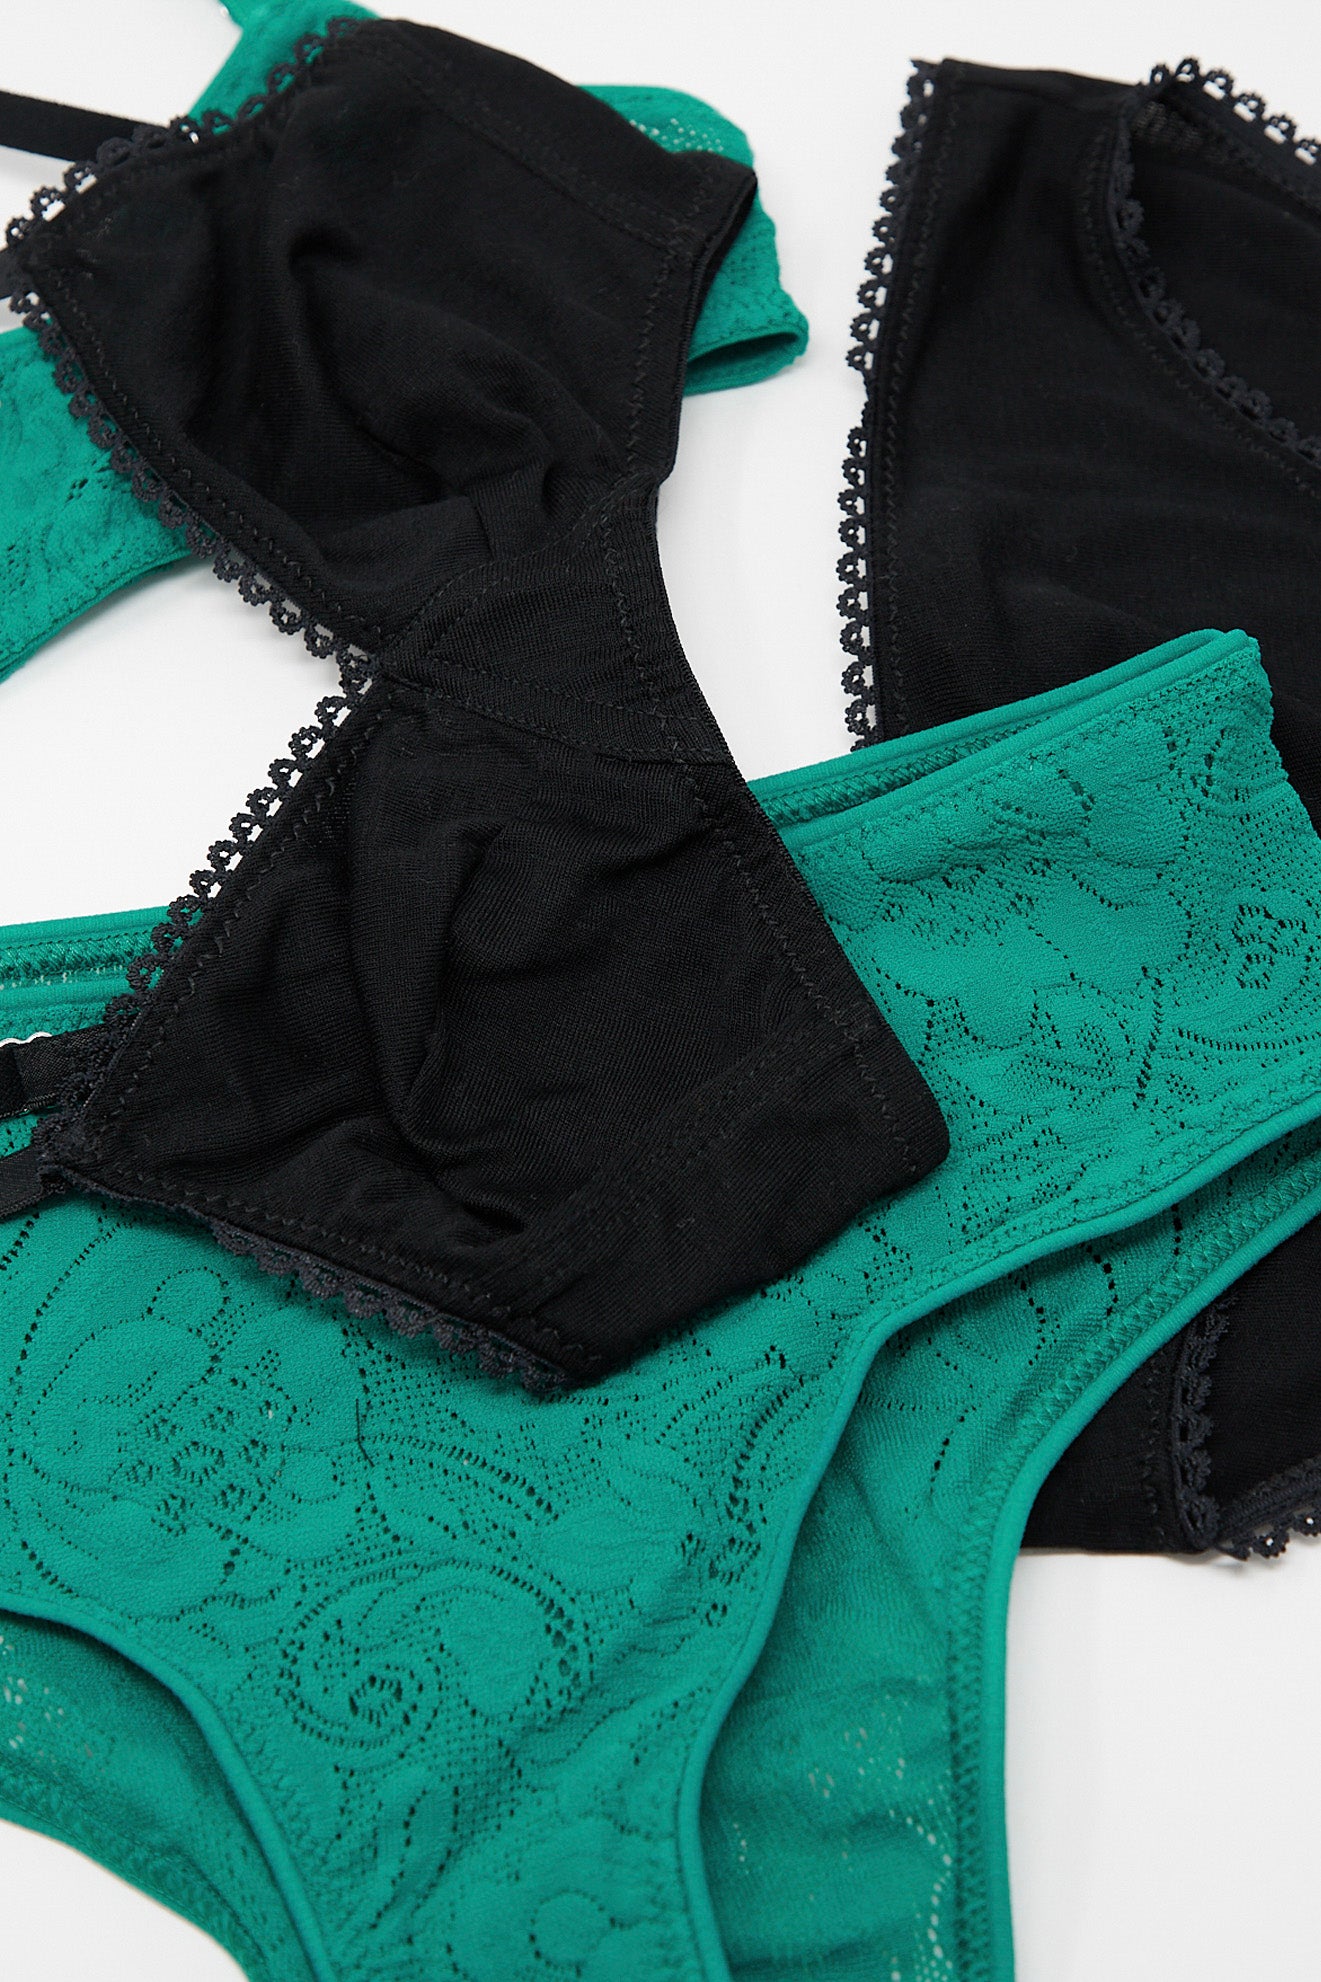 A set of black and green Araks Imogen Hipster in Emerald French lace lingerie.